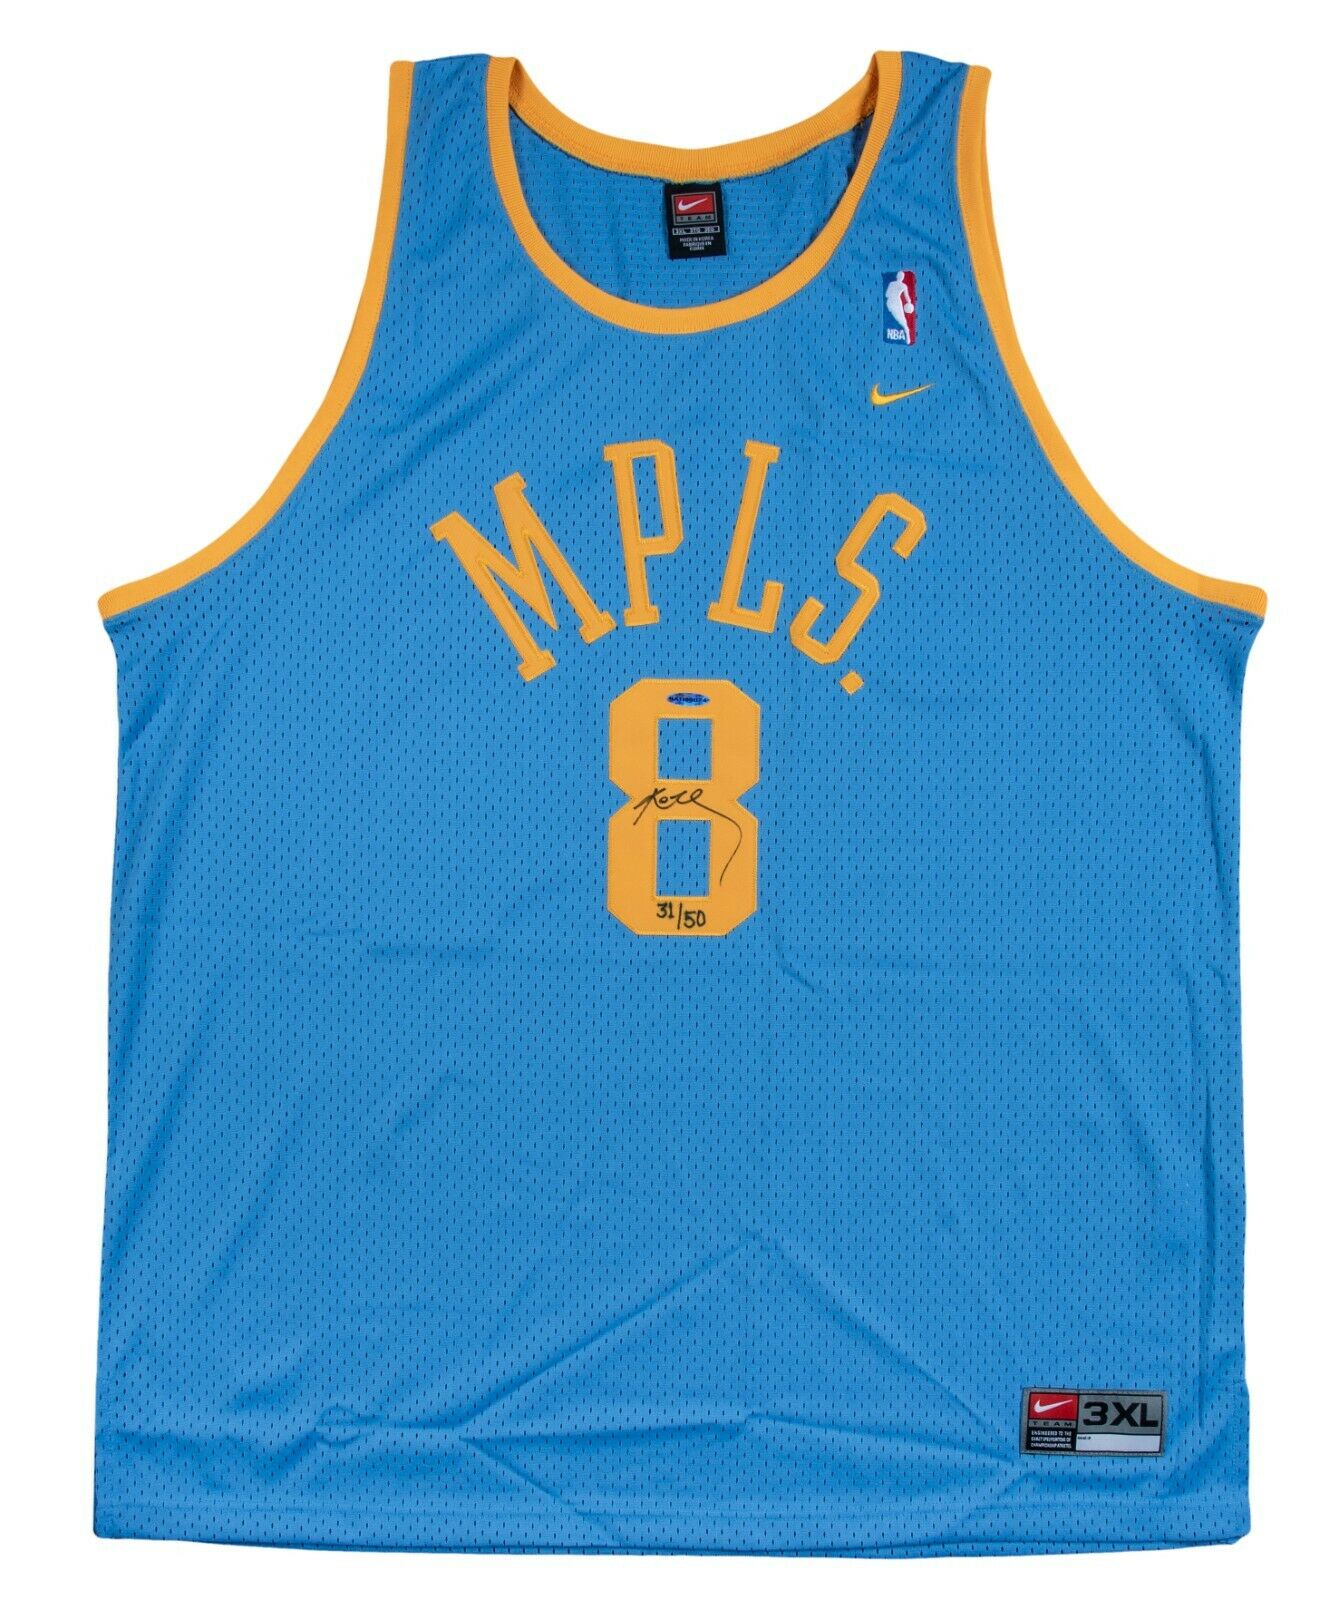 A Los Angeles Lakers MPLS. Kobe Bryant Jersey